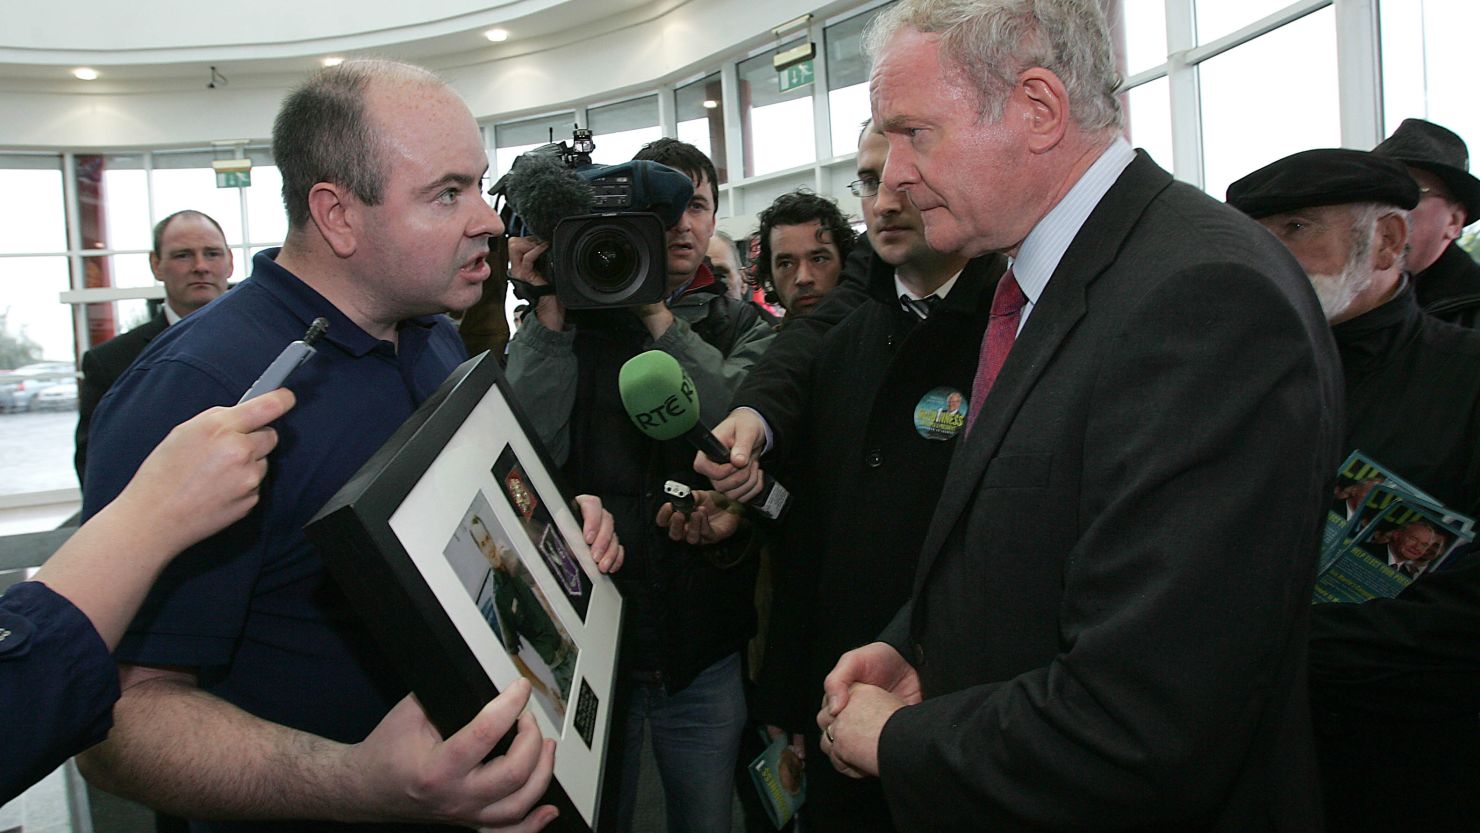 David Kelly confronts Sinn Fein presidential candidate Martin McGuiness demanding he name his father's killers.